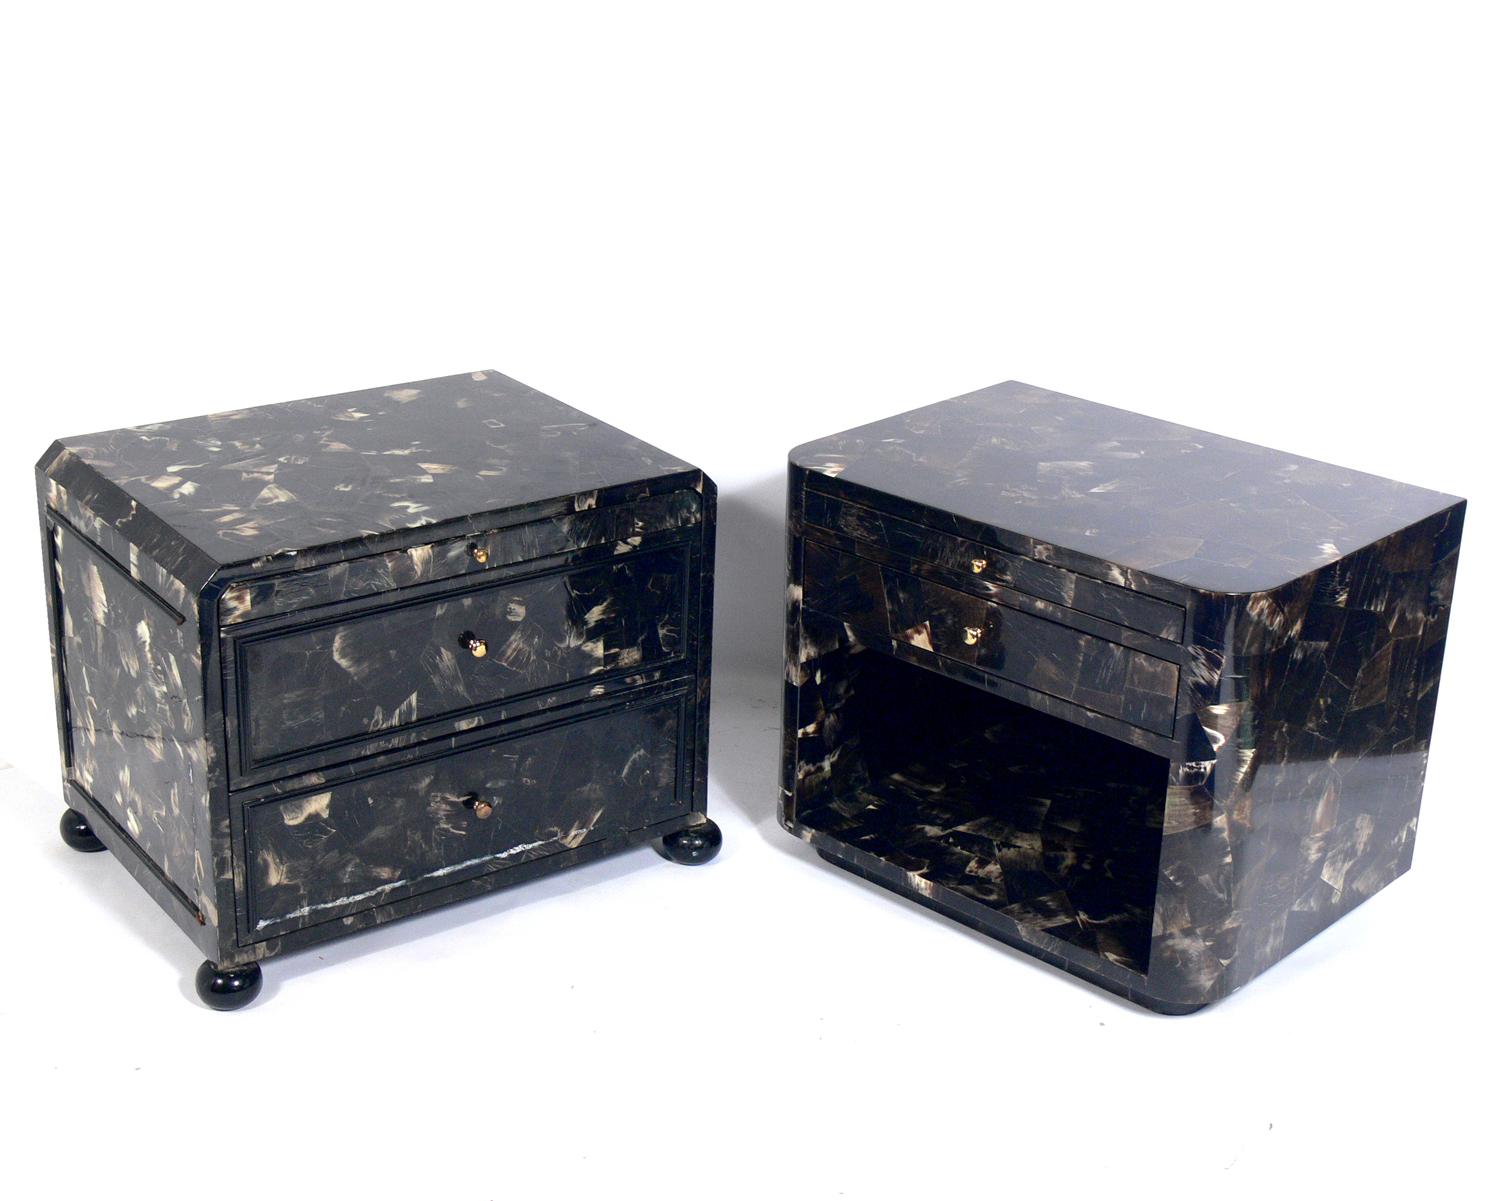 *The one seen on the right has been sold. 

Lacquered horn nightstand or end table, American, circa 1980s. It is constructed of lacquered horn with beautiful color and graining. It is a versatile size and can be used as a nightstand, or as a side or